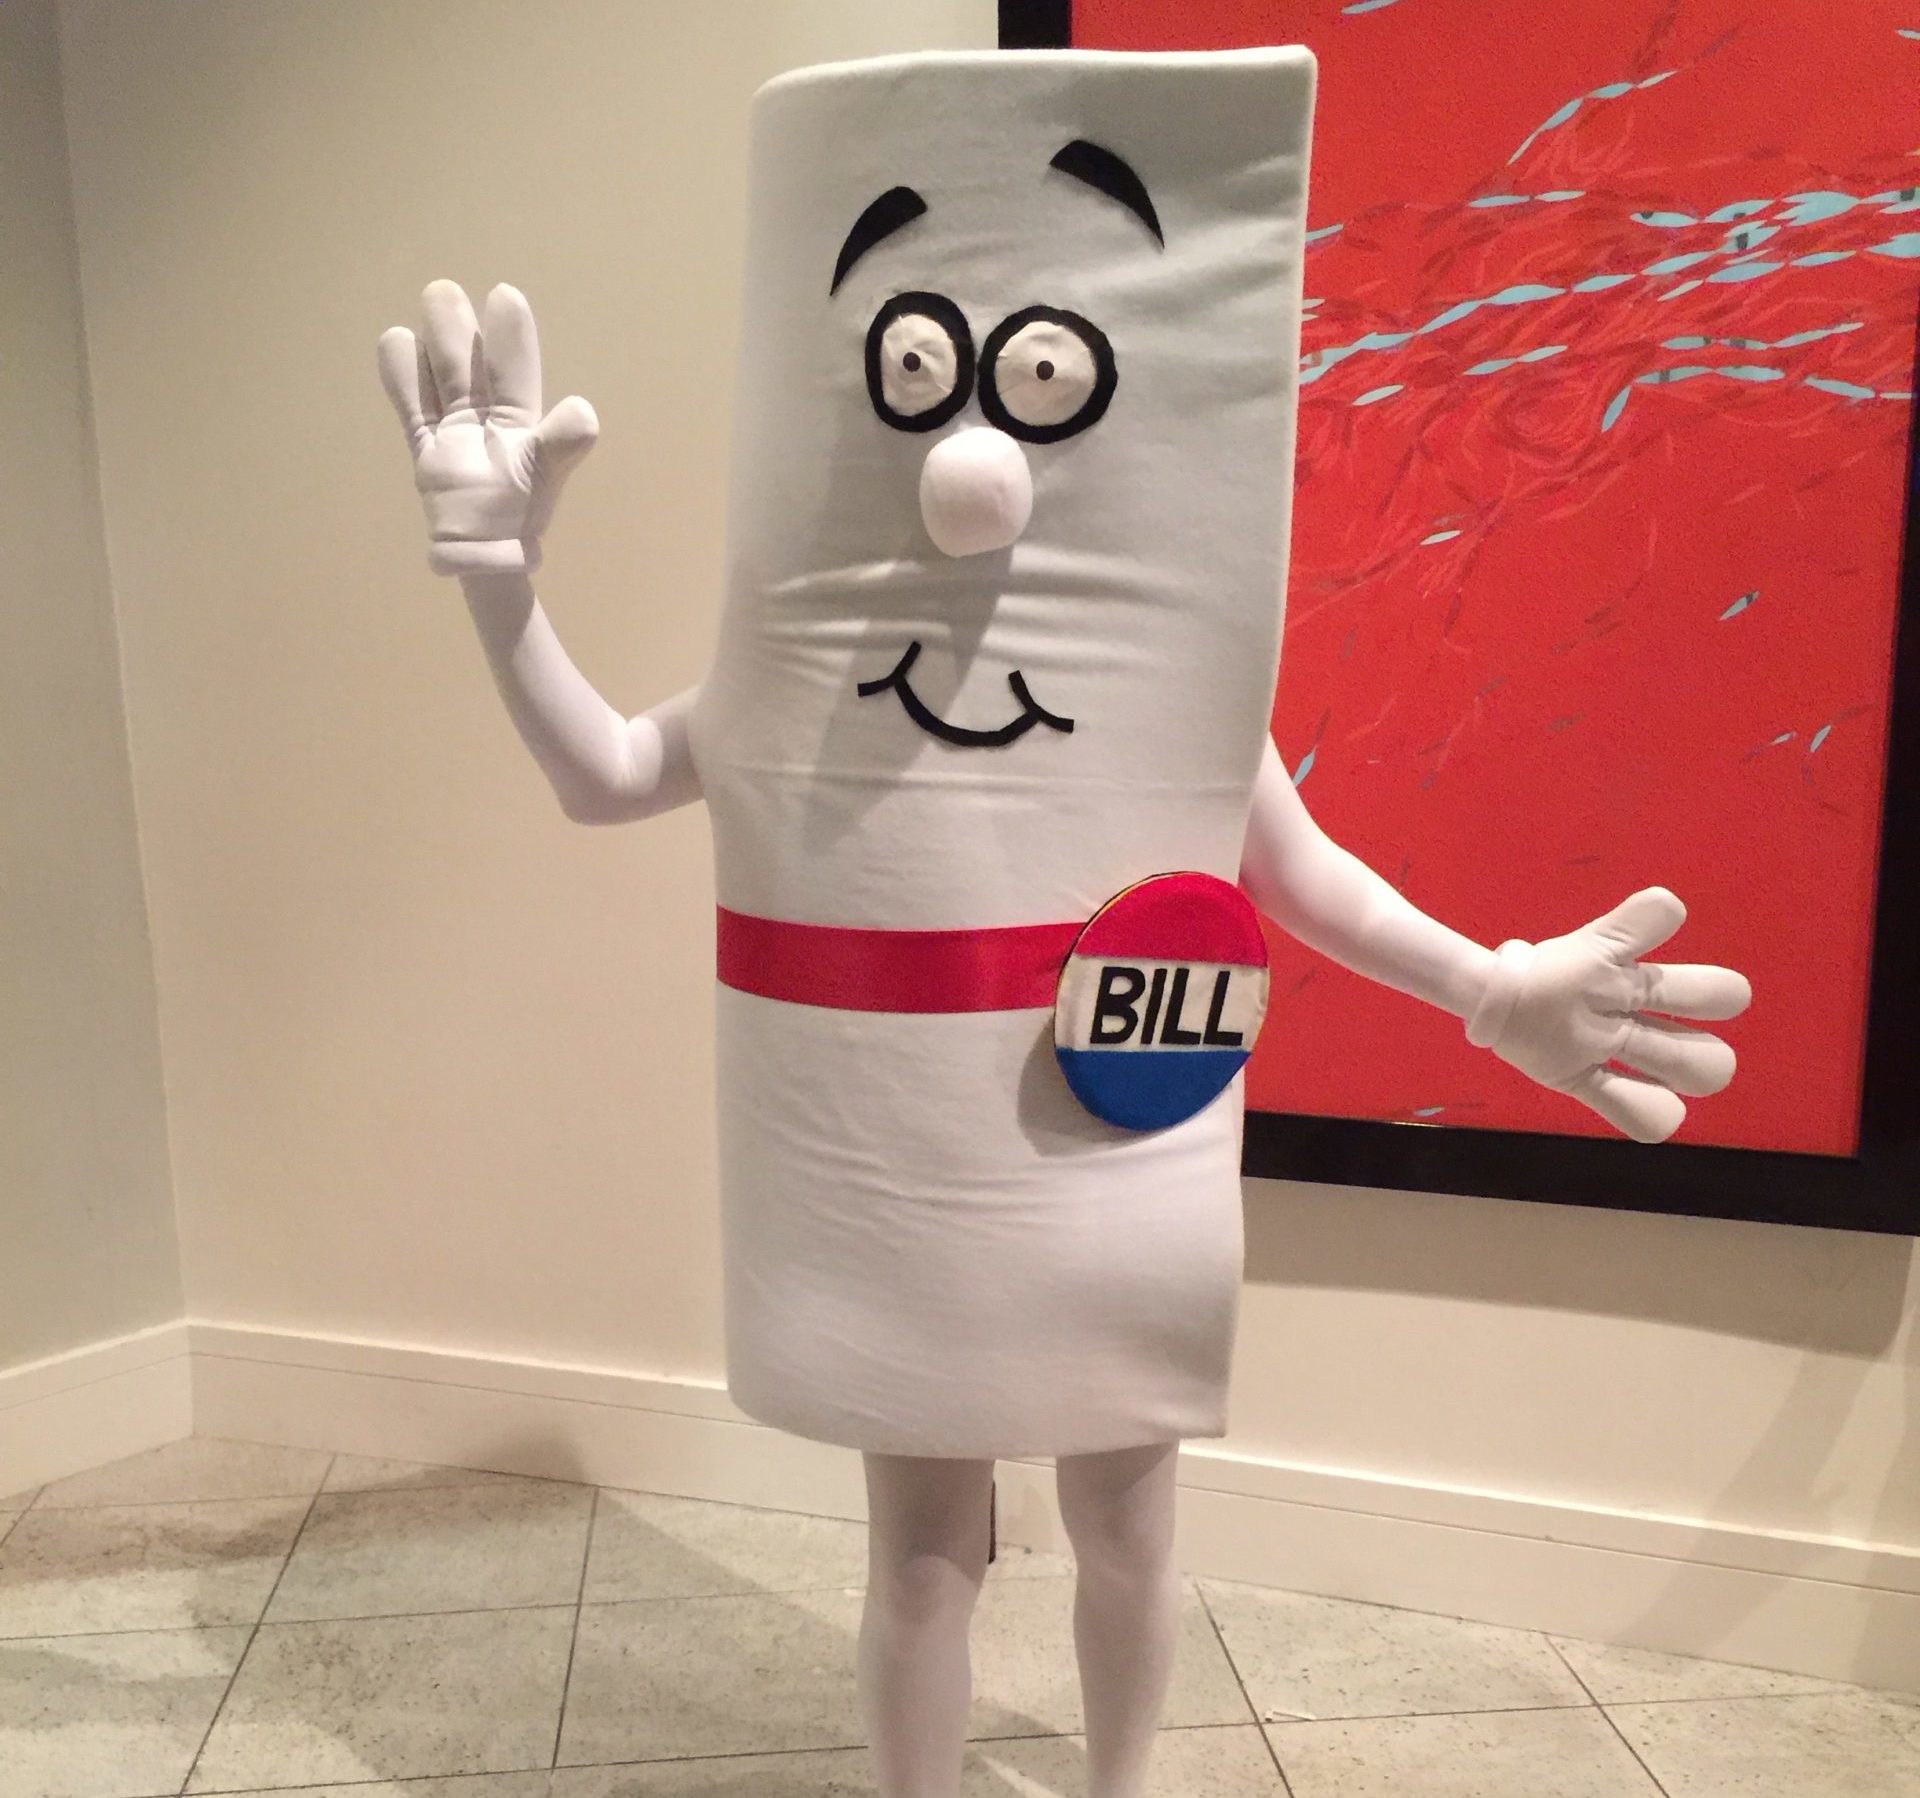 Color photograph of a person in a school hallway dressed in a Schoolhouse Rock "I'm a Bill" costume